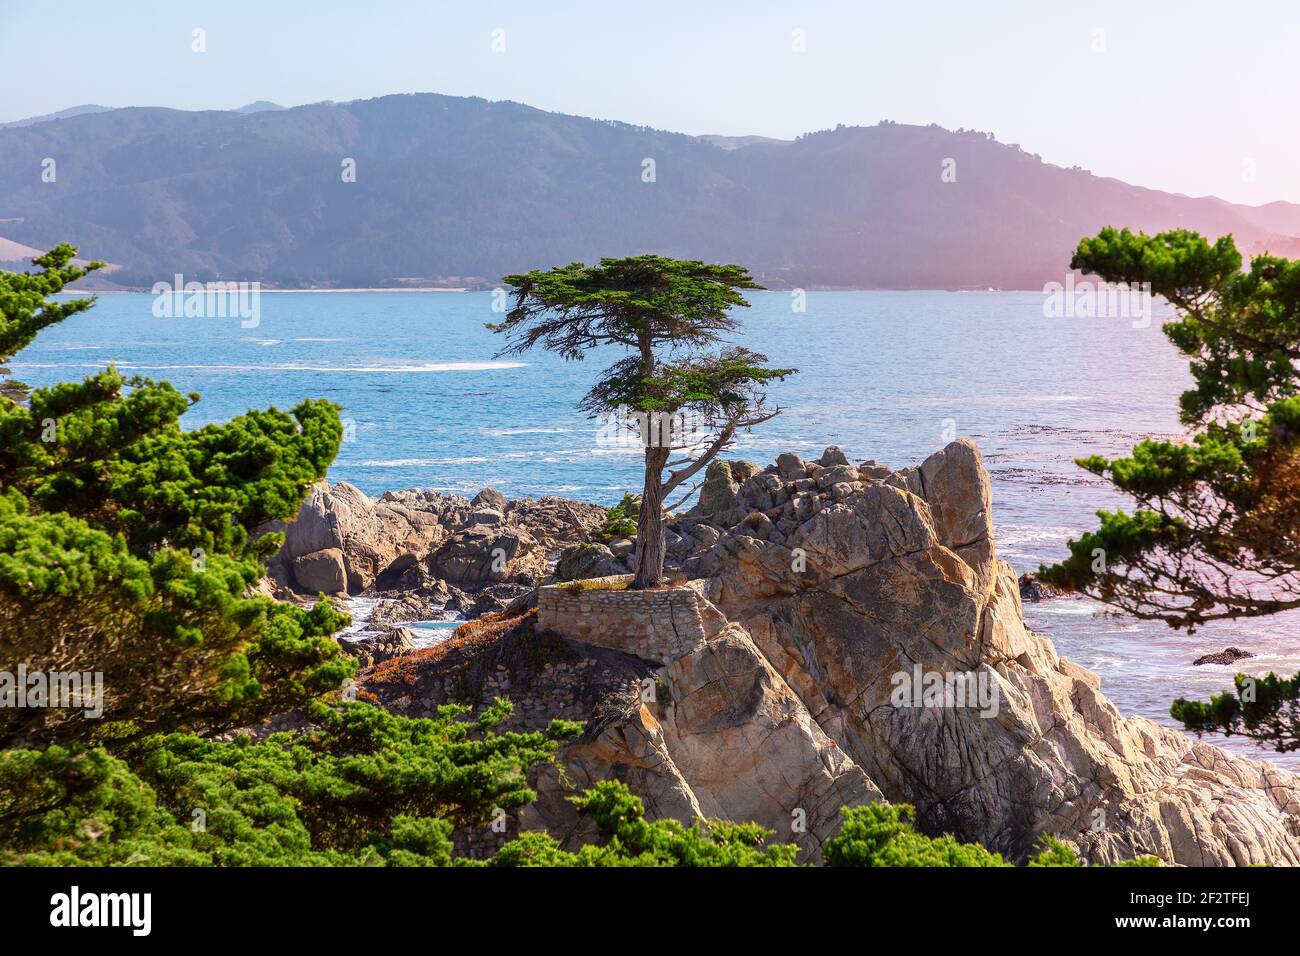 Beautiful lone Cypress tree (Monterey cypress) on 17-mile drive. The tree is a Western icon, and has been called one of the most photographed trees in Stock Photo